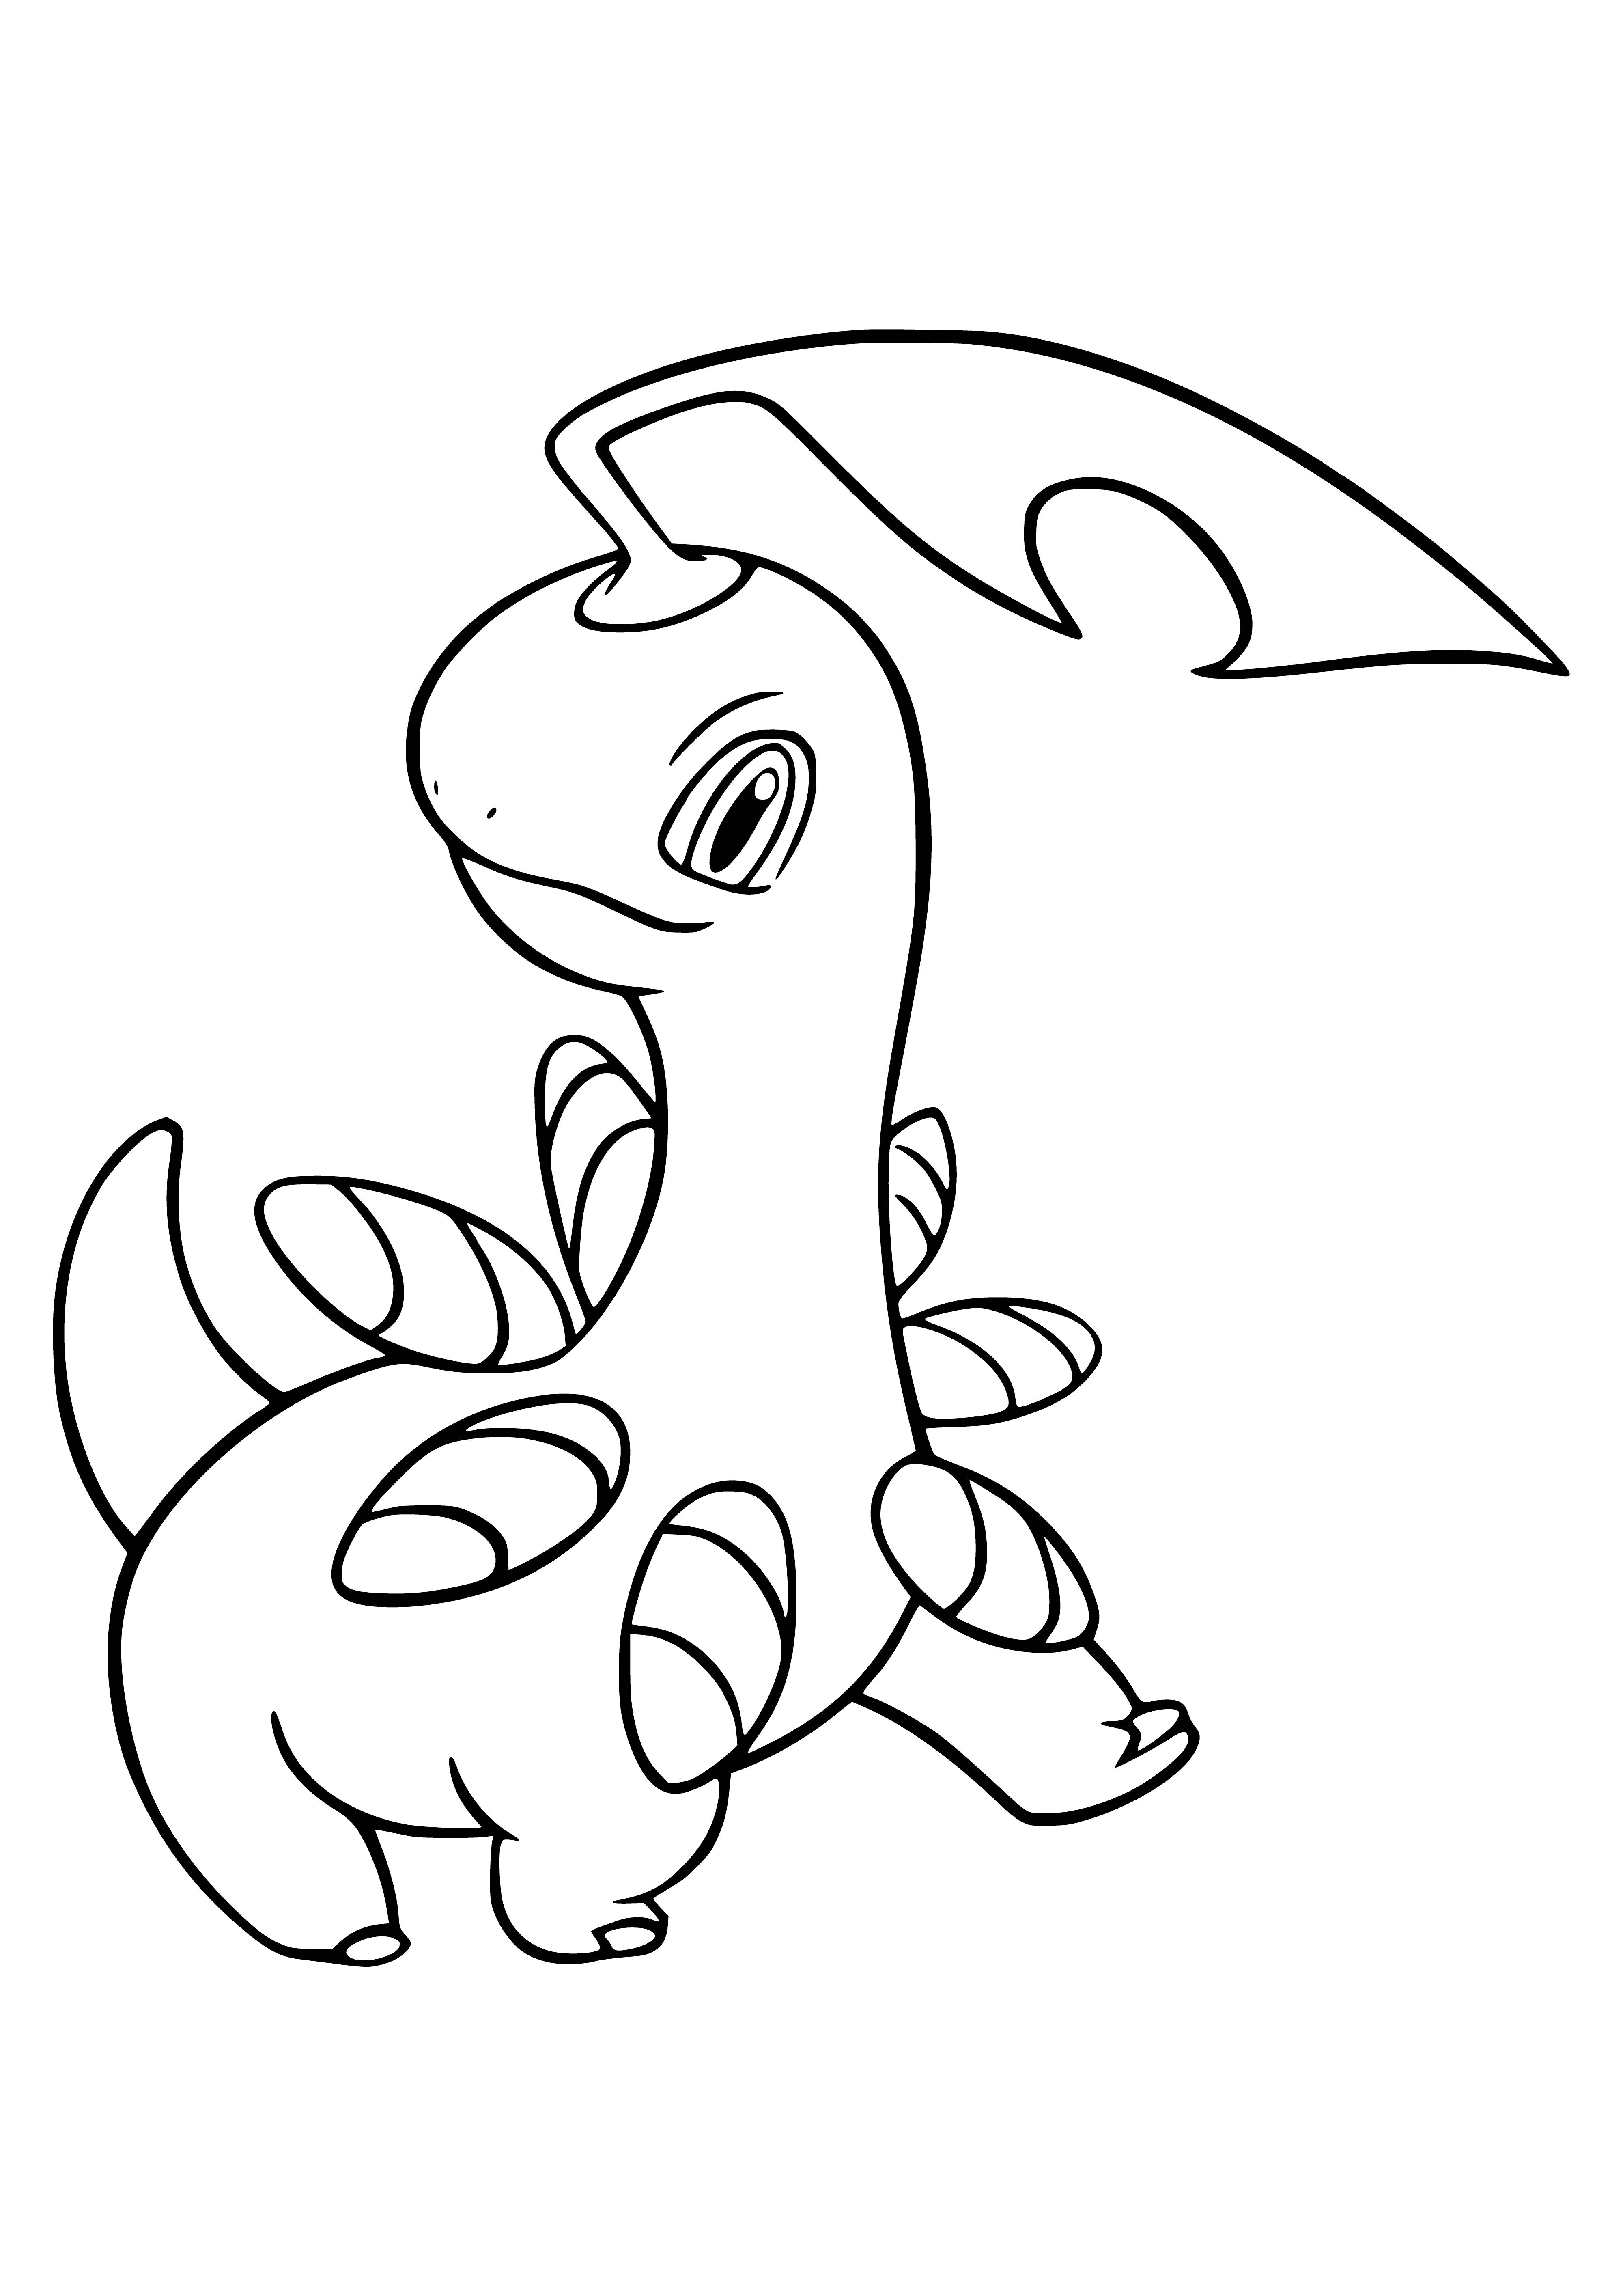 Pokemon Bayleef coloring page